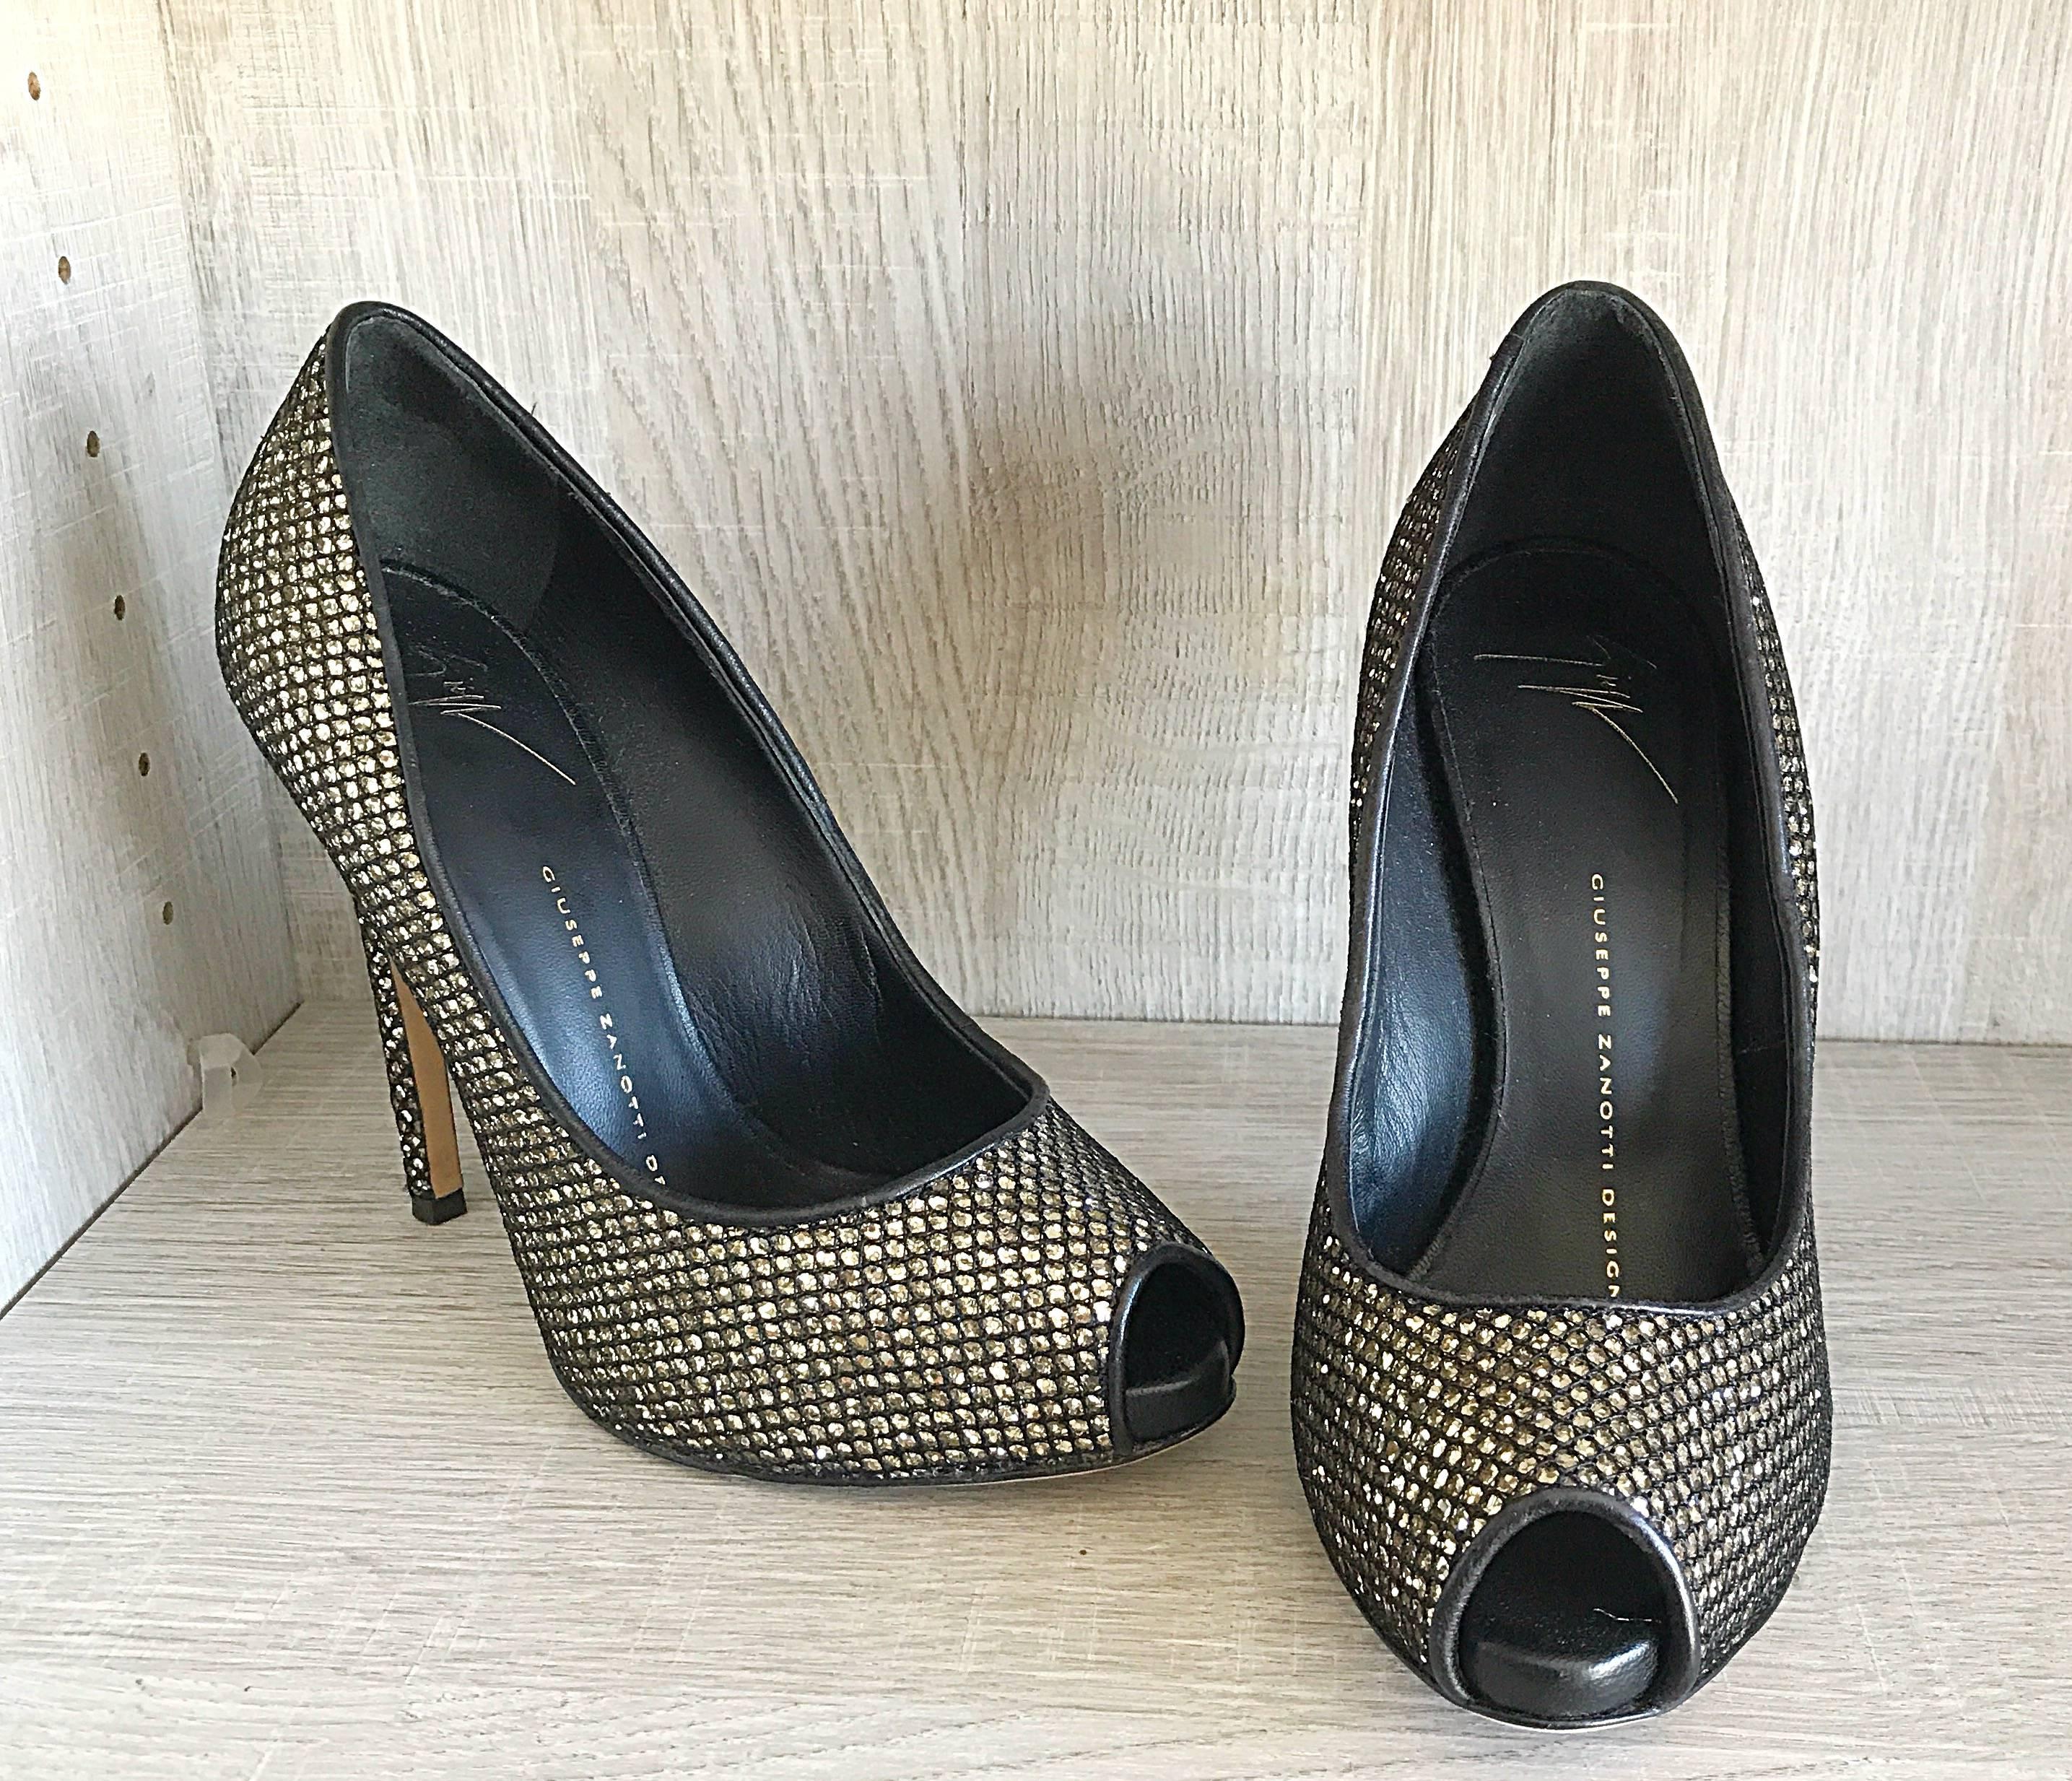 Giuseppe Zanotti Black and Silver Glitter Size 37 / 7 Peep Toe Shoes High Heels  In Excellent Condition For Sale In San Diego, CA